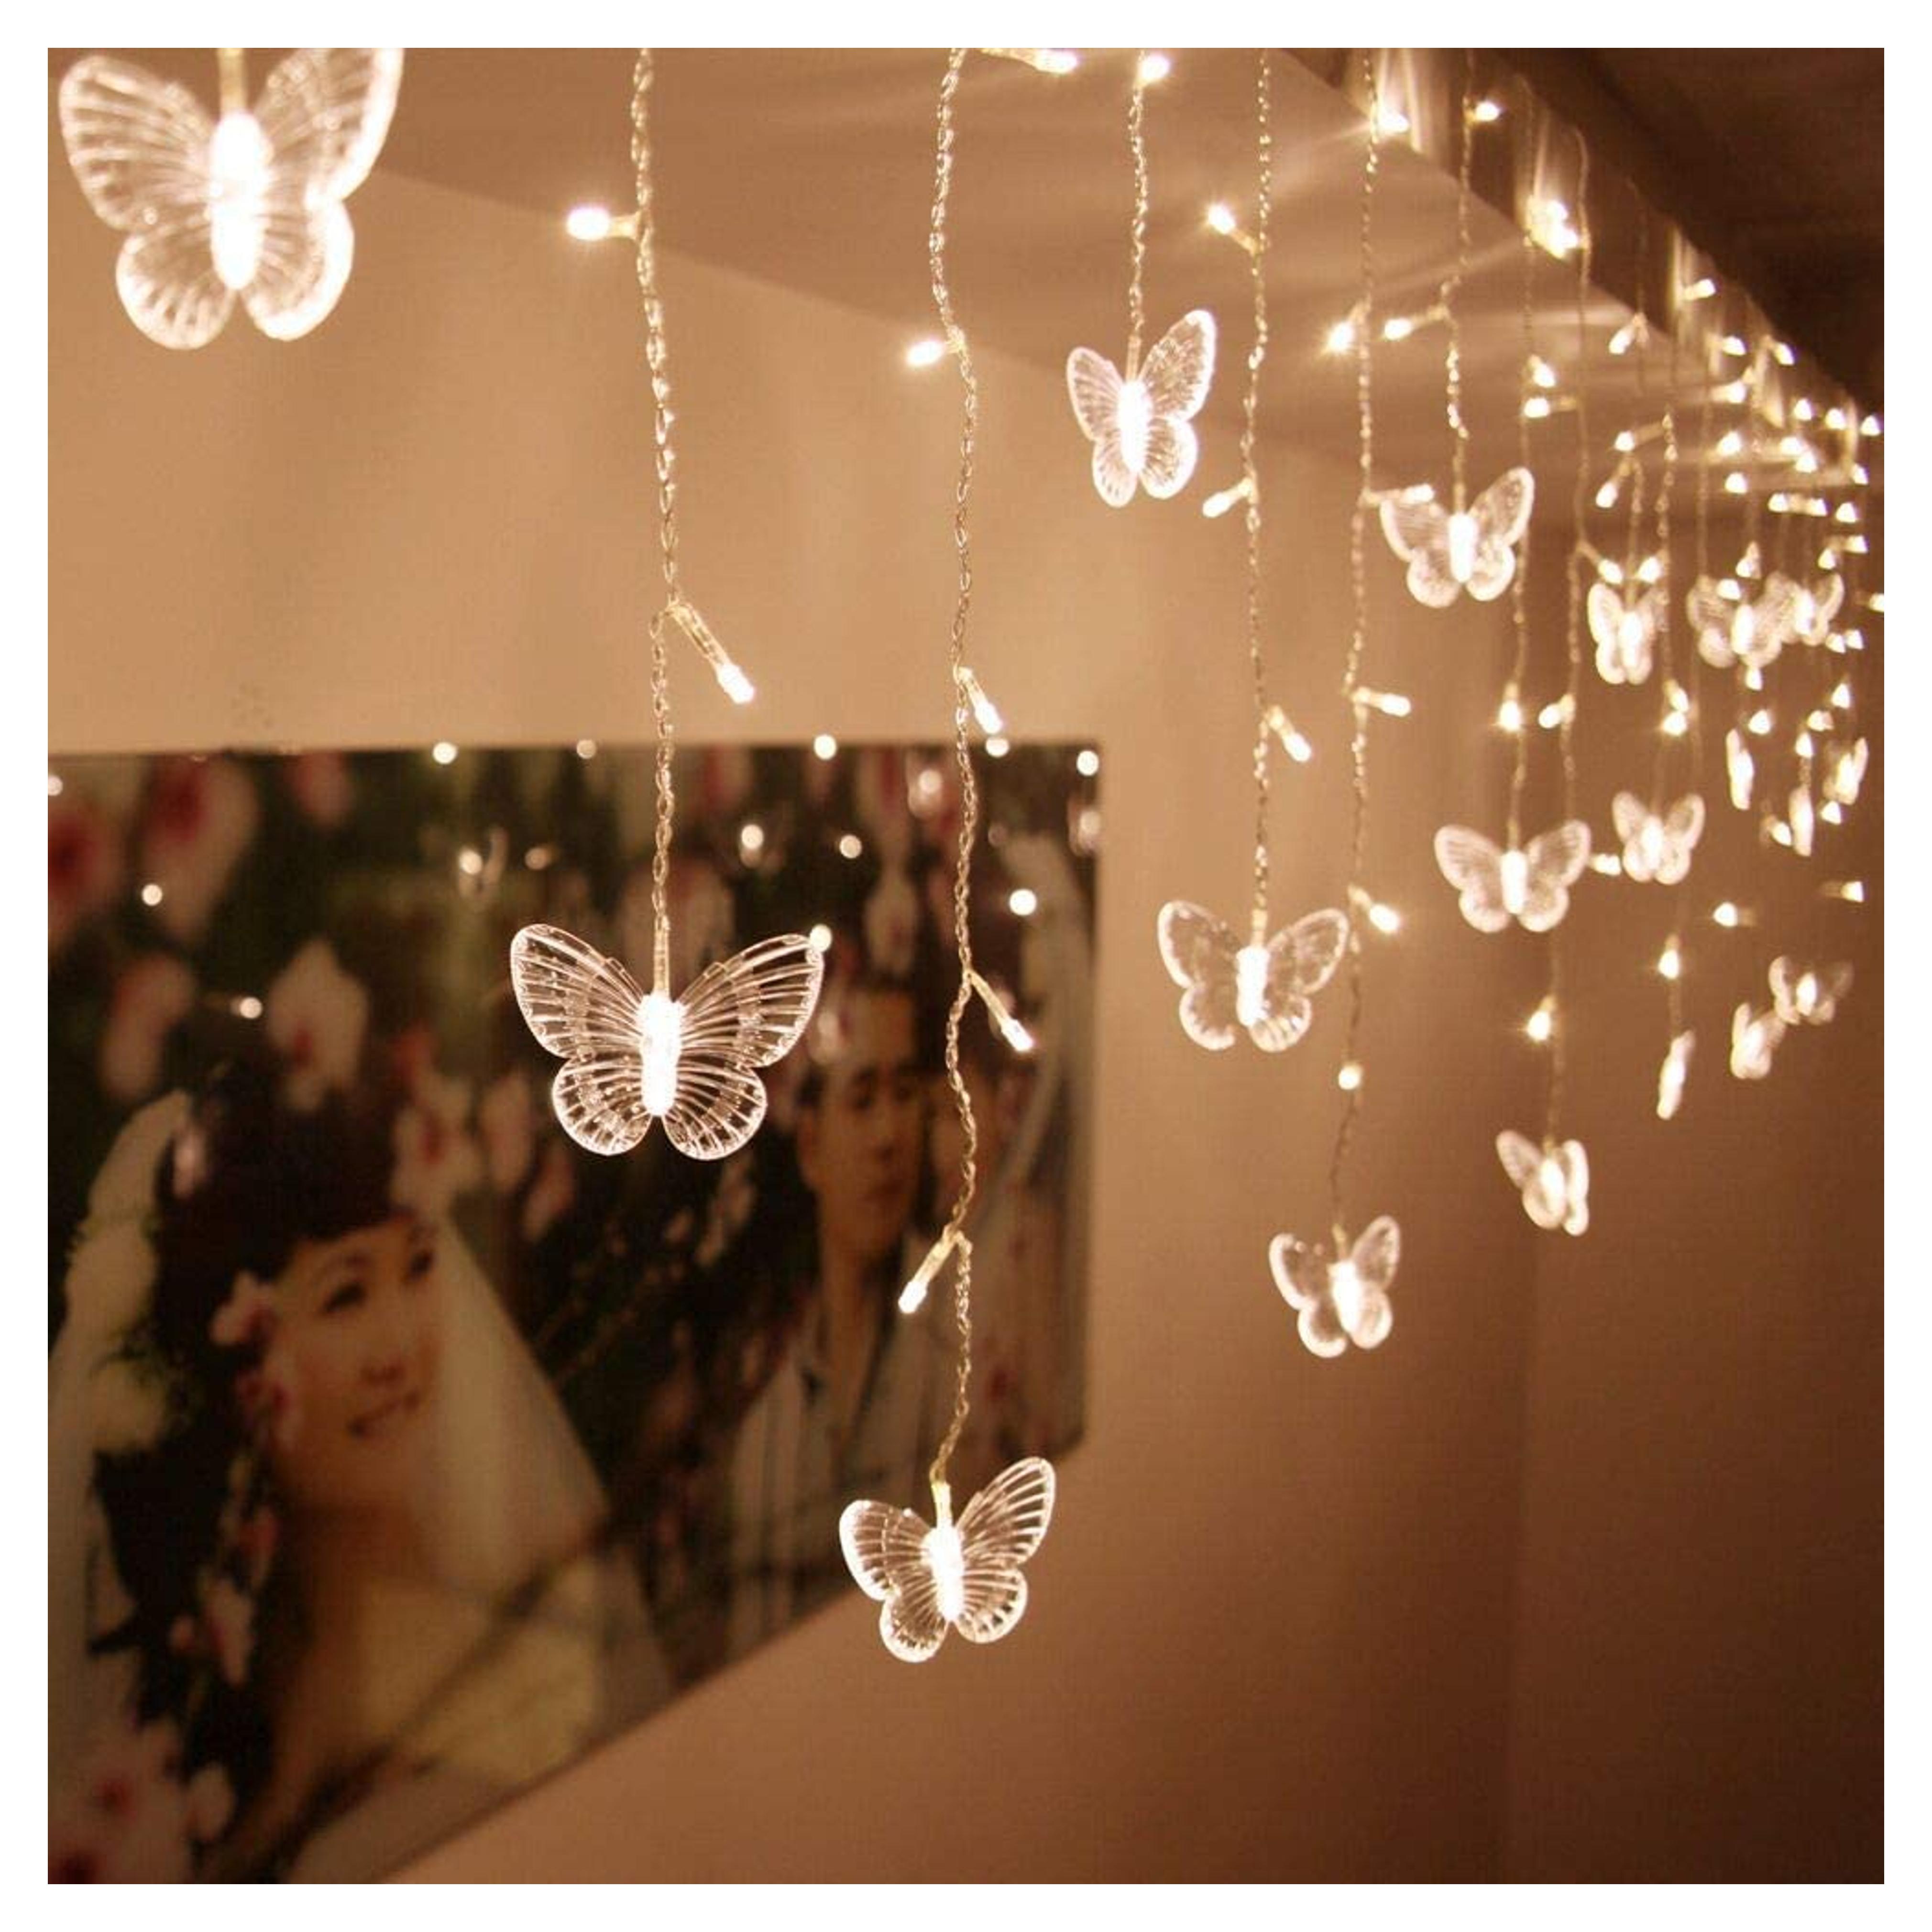 BJYHIYH Led Curtain Lights USB Powered 8 Modes Window Curtain String Lights 10 Butterflies Twinkle Lights for Christmas Dorm Room Decoration(Warm White)